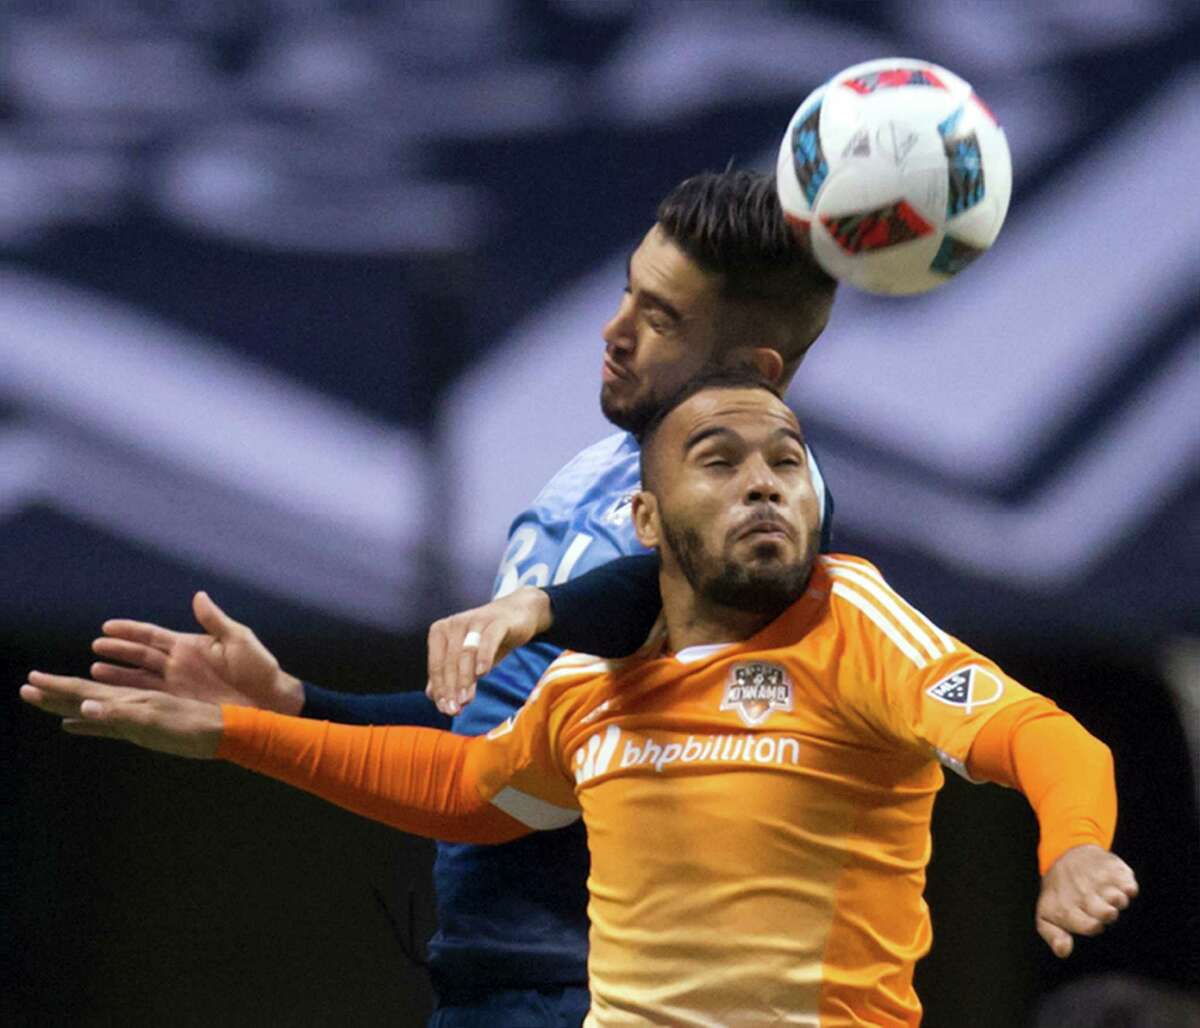 Houston Dynamo's Alex Monteiro de Lima, front, and Vancouver Whitecaps' Pedro Morales vie for the ball during the first half of an MLS soccer game in Vancouver, British Columbia, on Saturday, March 26, 2016. (Darryl Dyck/The Canadian Press via AP)